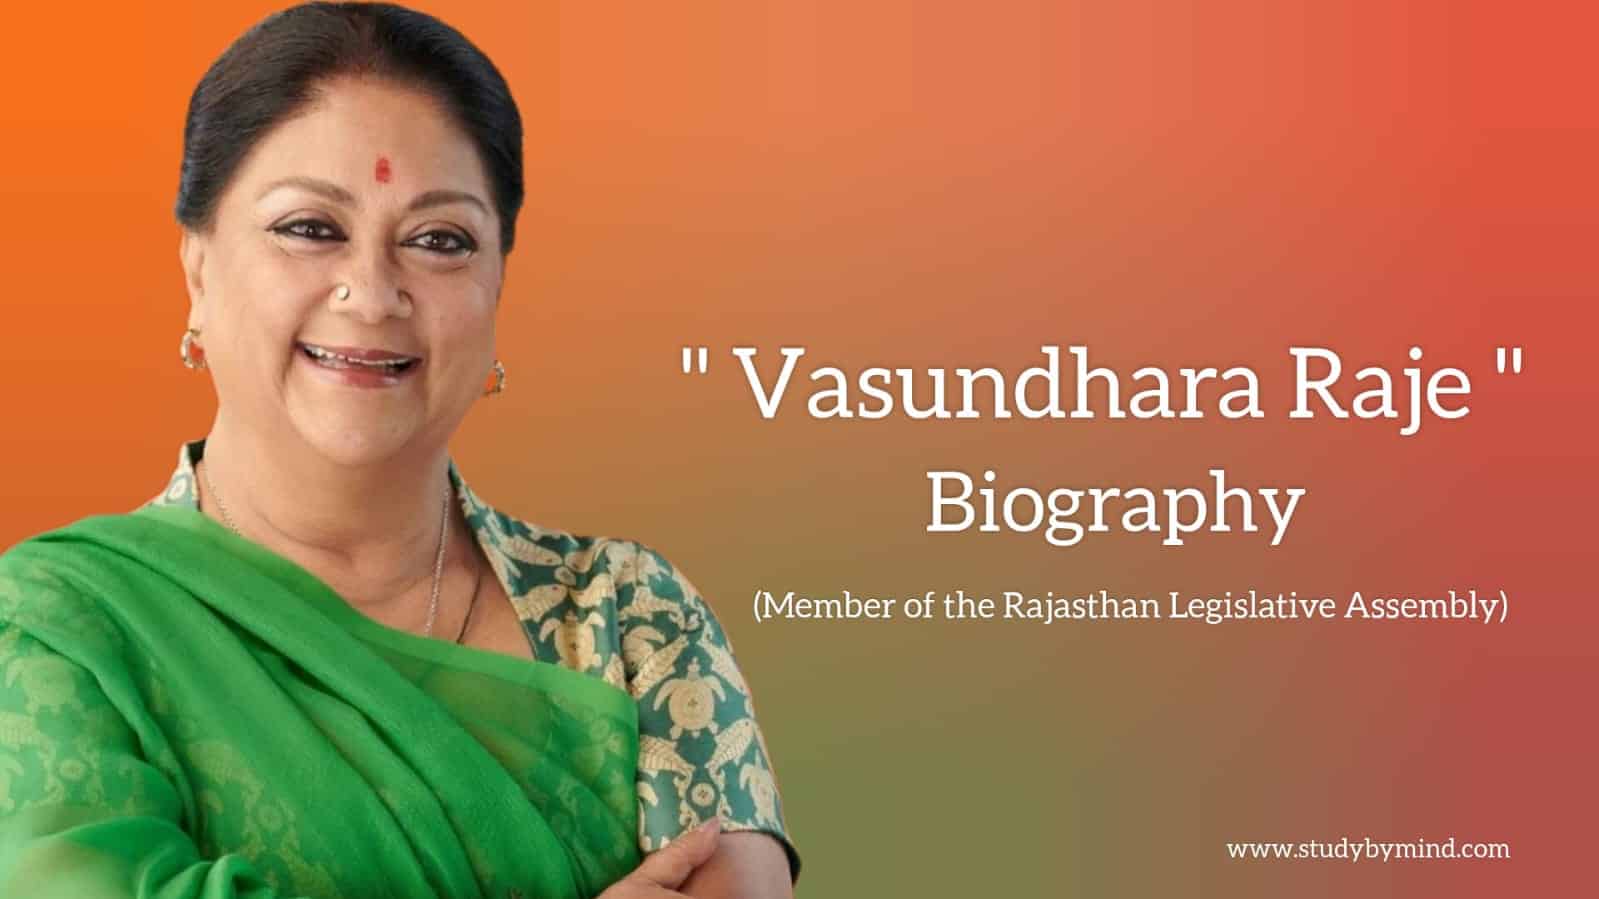 You are currently viewing Vasundhara raje biography in english (Indian Politician)